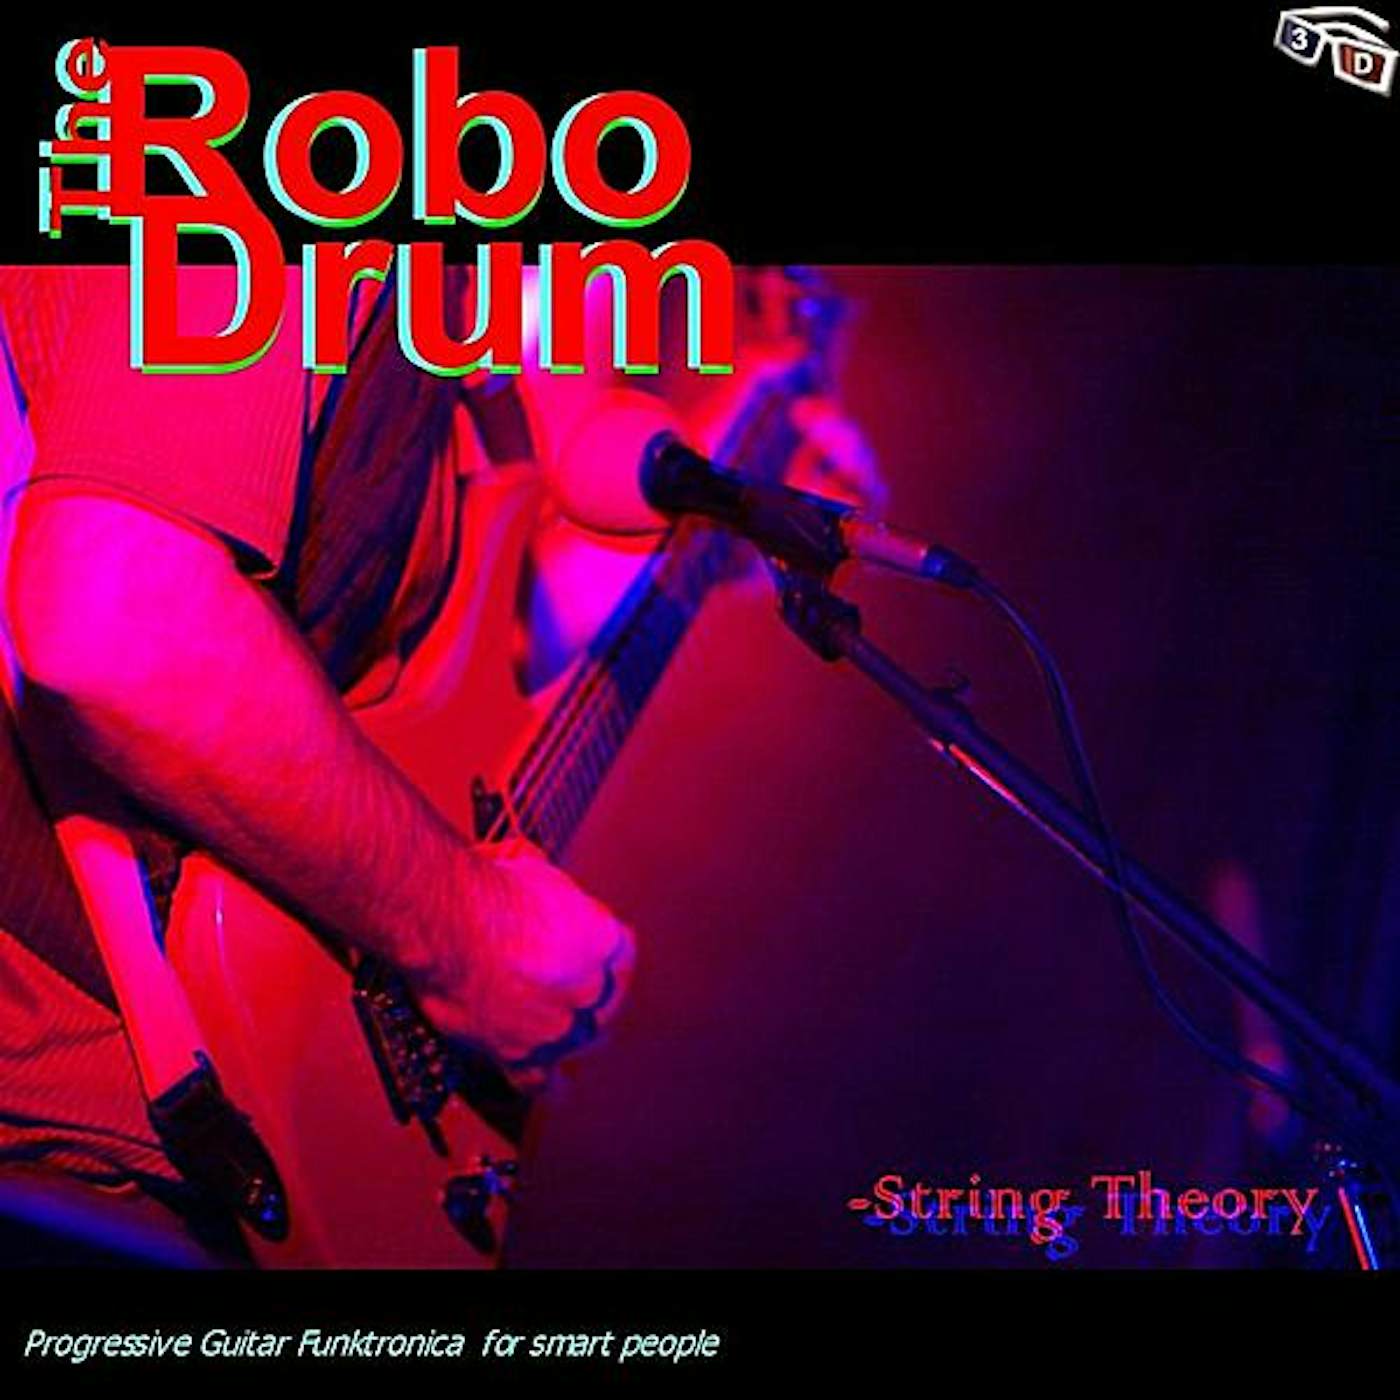 Robodrum STRING THEORY CD